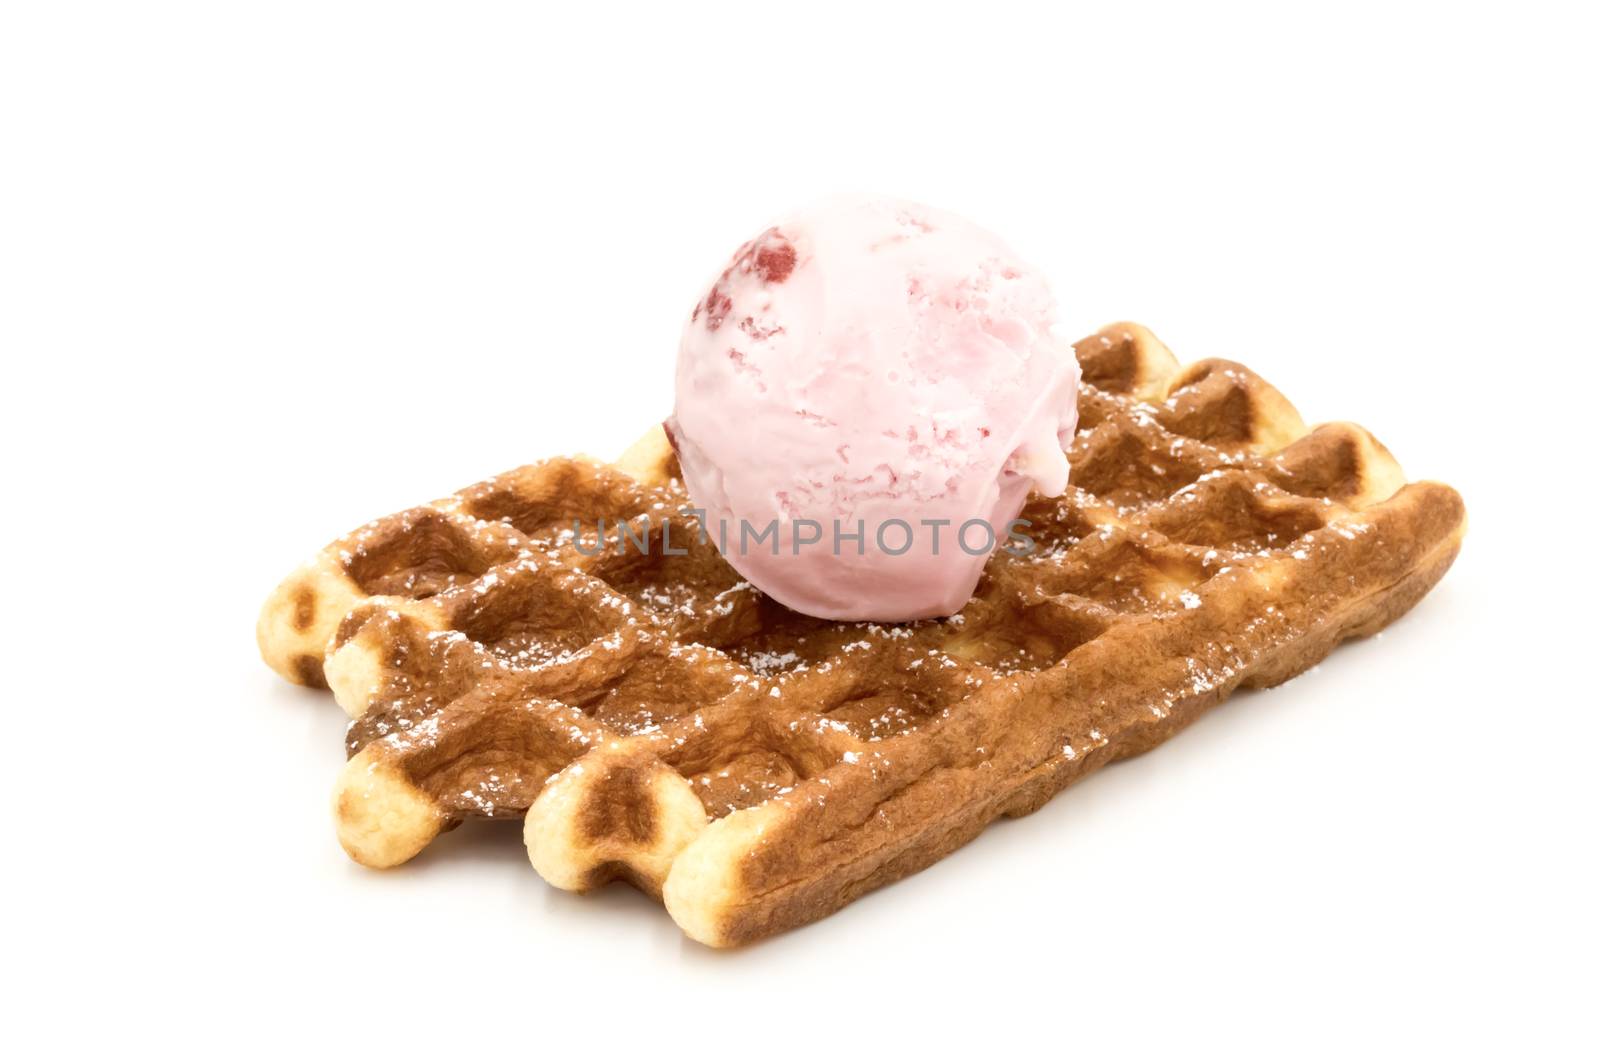 Freshly baked Belgian waffles with a scoop of strawberry ice cream